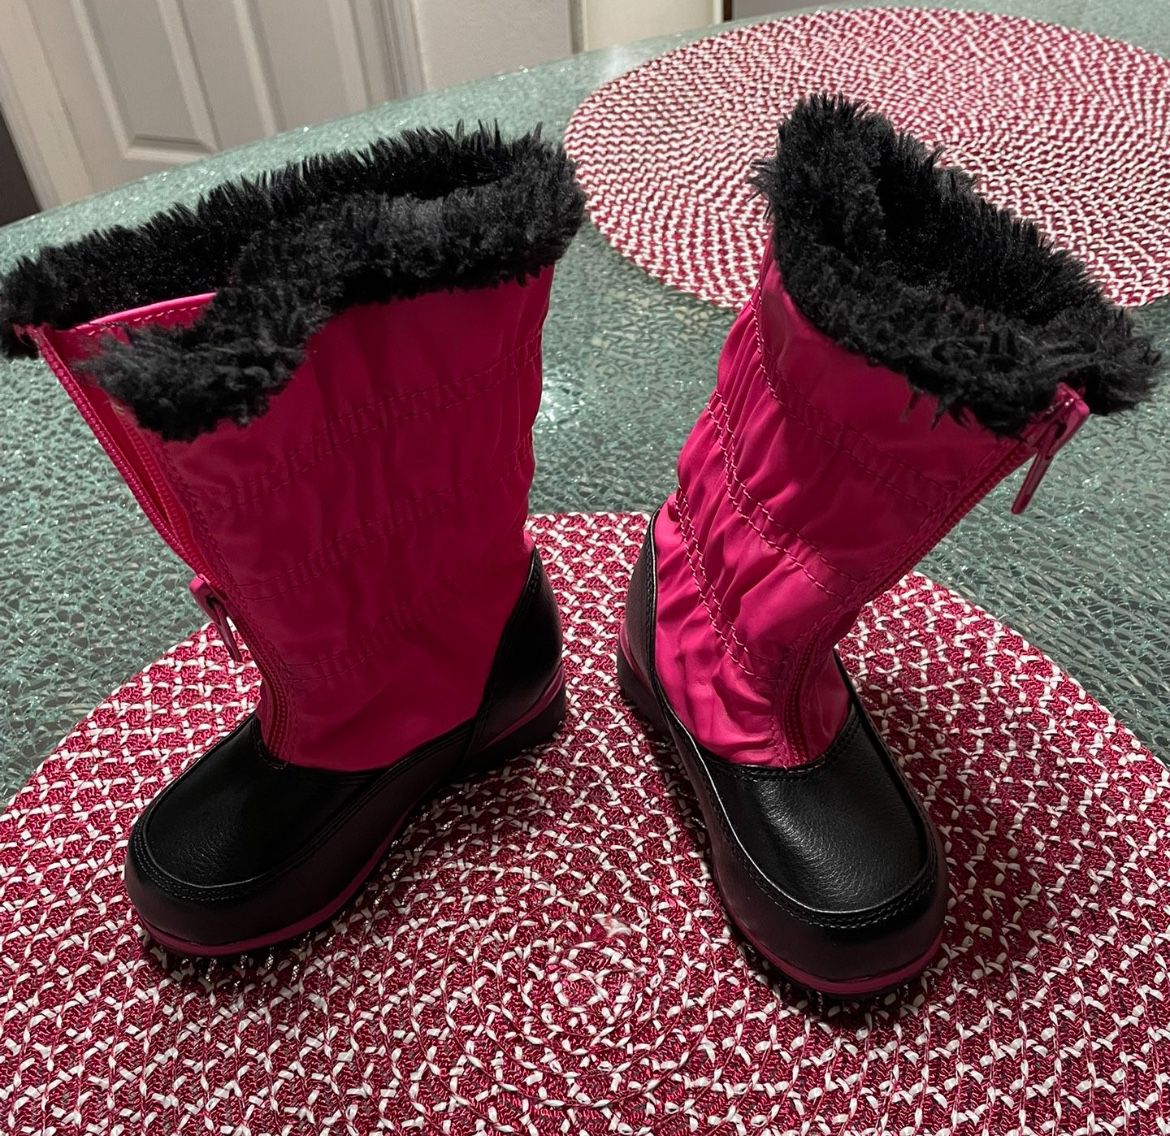 Rugged Outdoors Boots Pink Toddler Sz 6